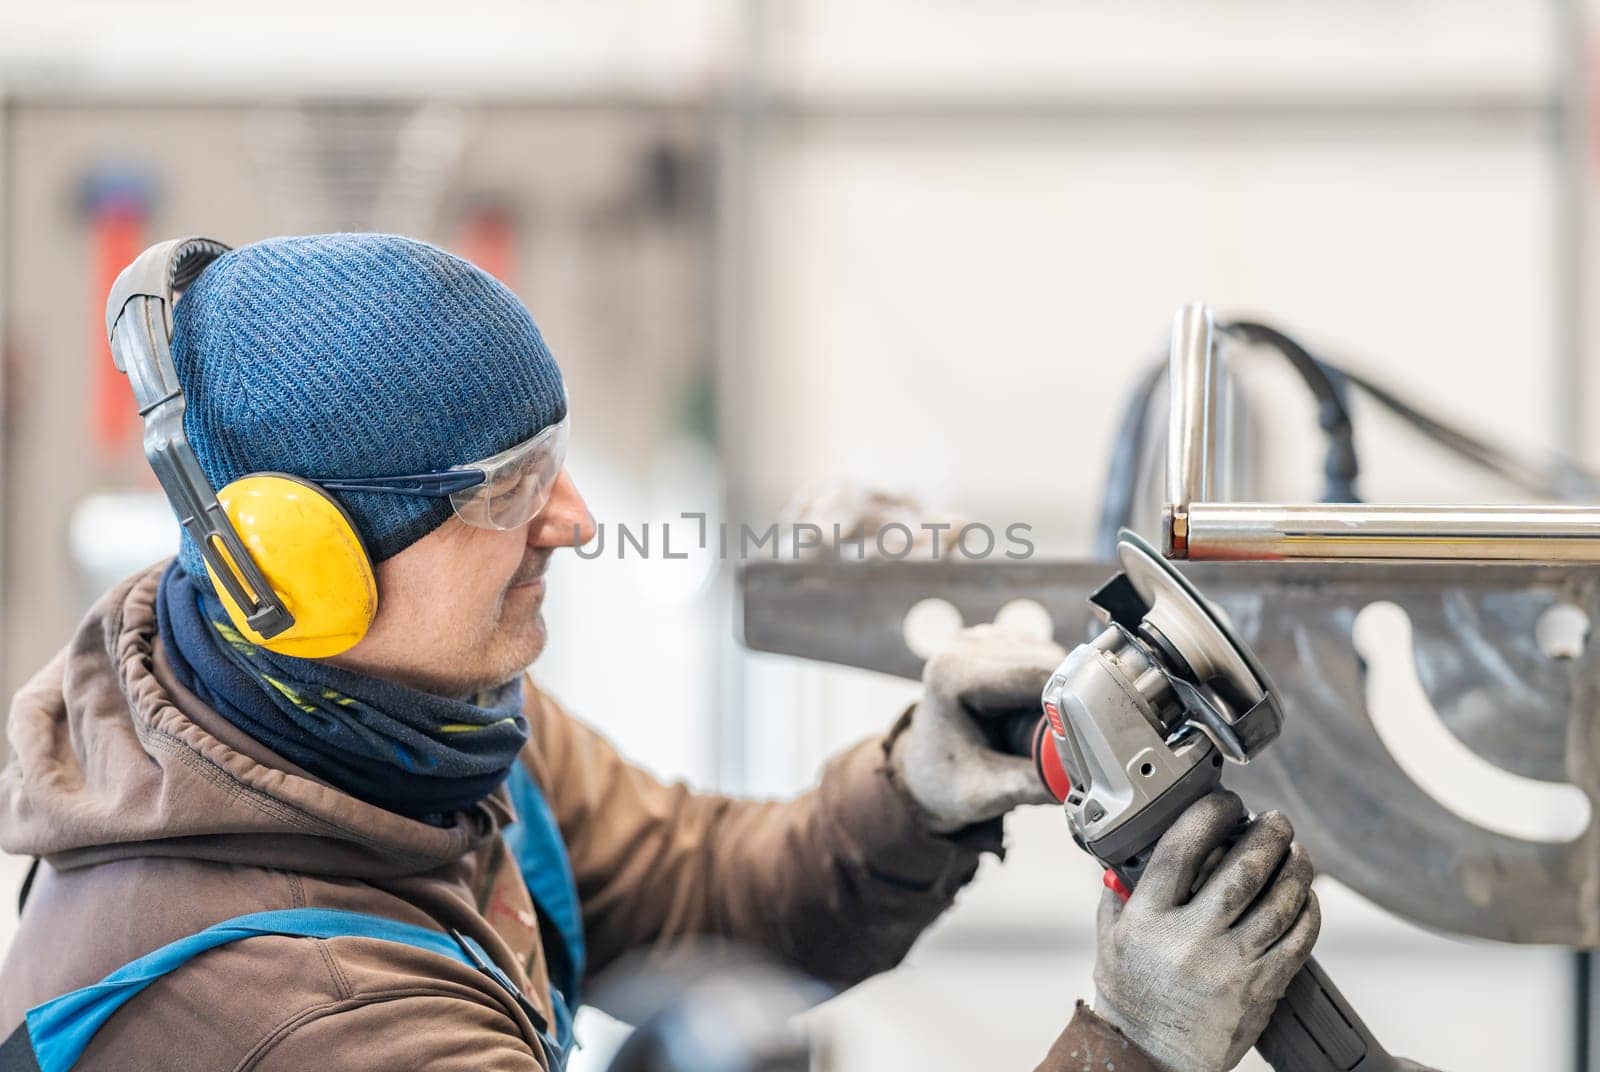 Skilled Worker Grinding Metal with Safety Equipment in Industrial Workshop by Edophoto